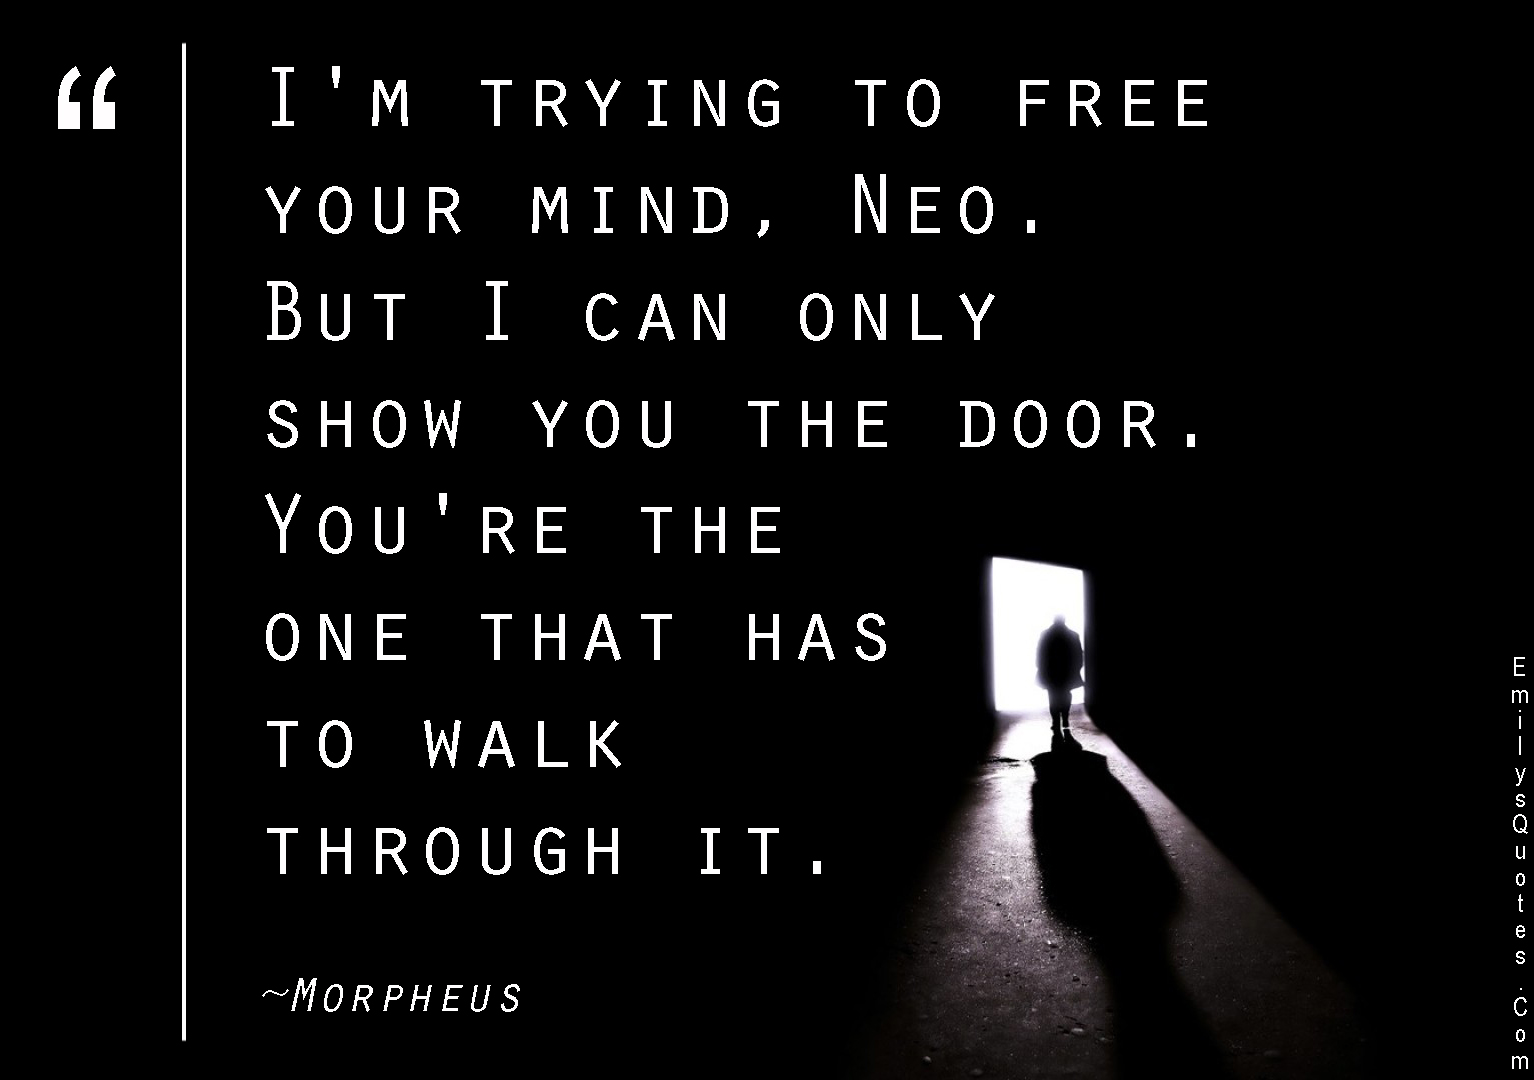 I’m trying to free your mind, Neo. But I can only show you the door. You’re the one that has to walk through it